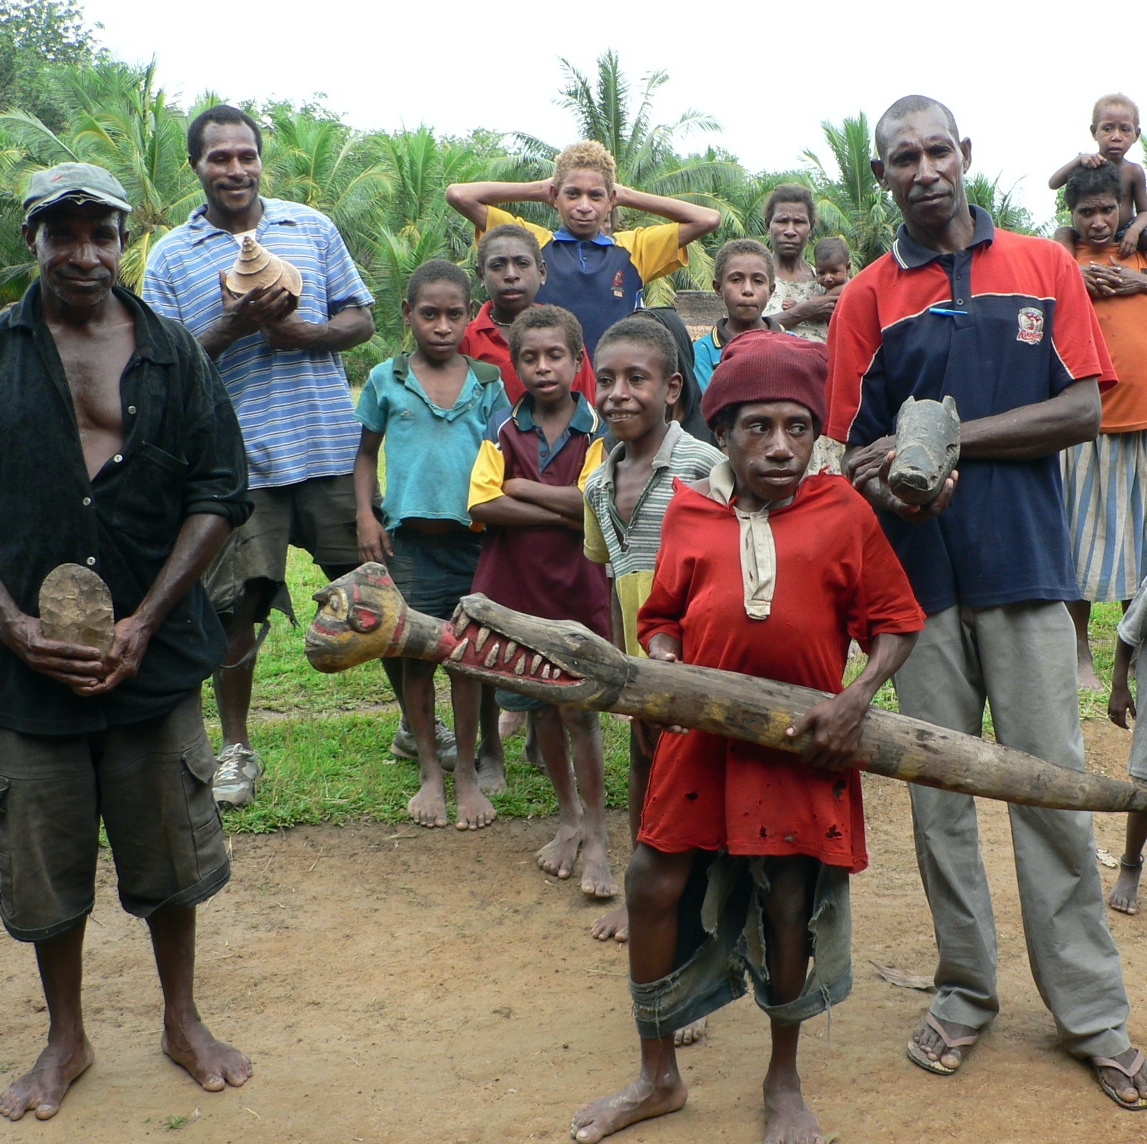 Some folks from the Gogodala area holding some artifacts for sale.  Photo by Greg Hamson, circa 2008.